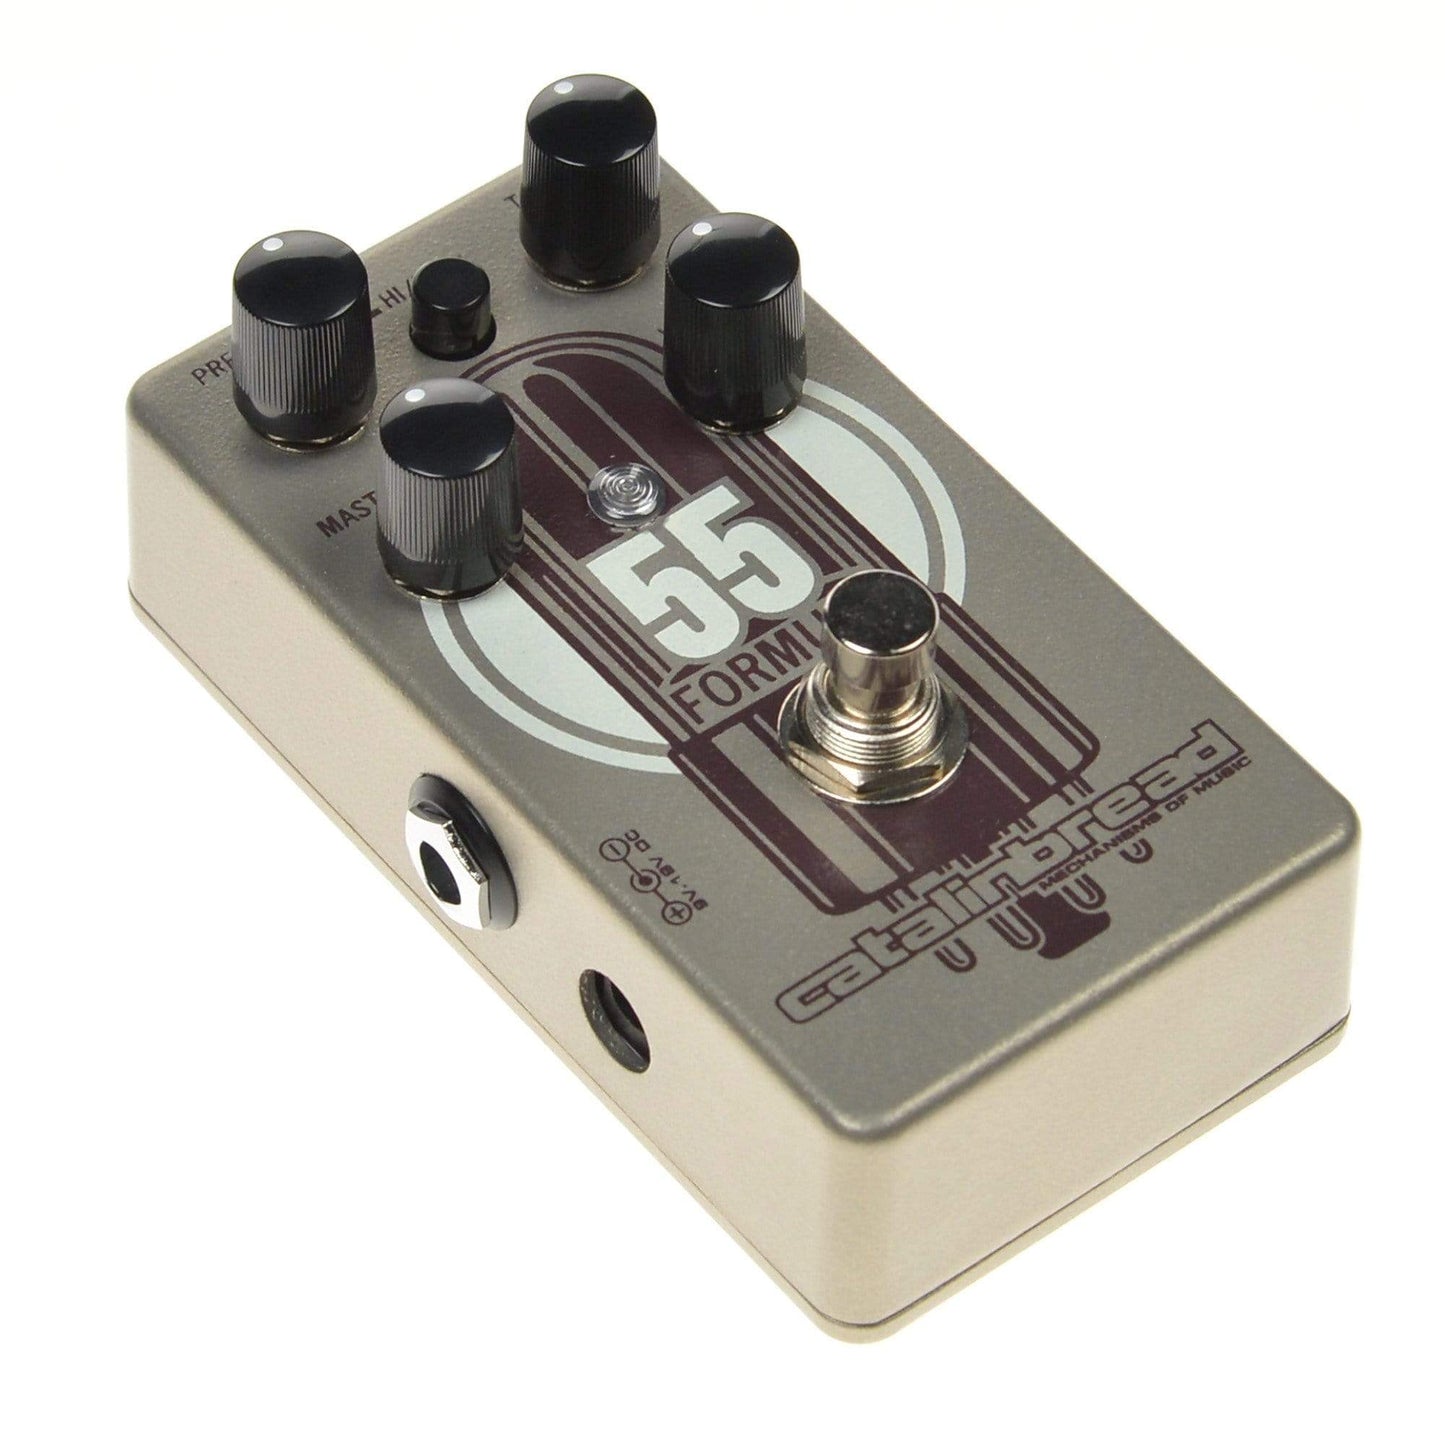 Catalinbread Formula No. 55 Vintage Tweed Deluxe Pedal Effects and Pedals / Overdrive and Boost